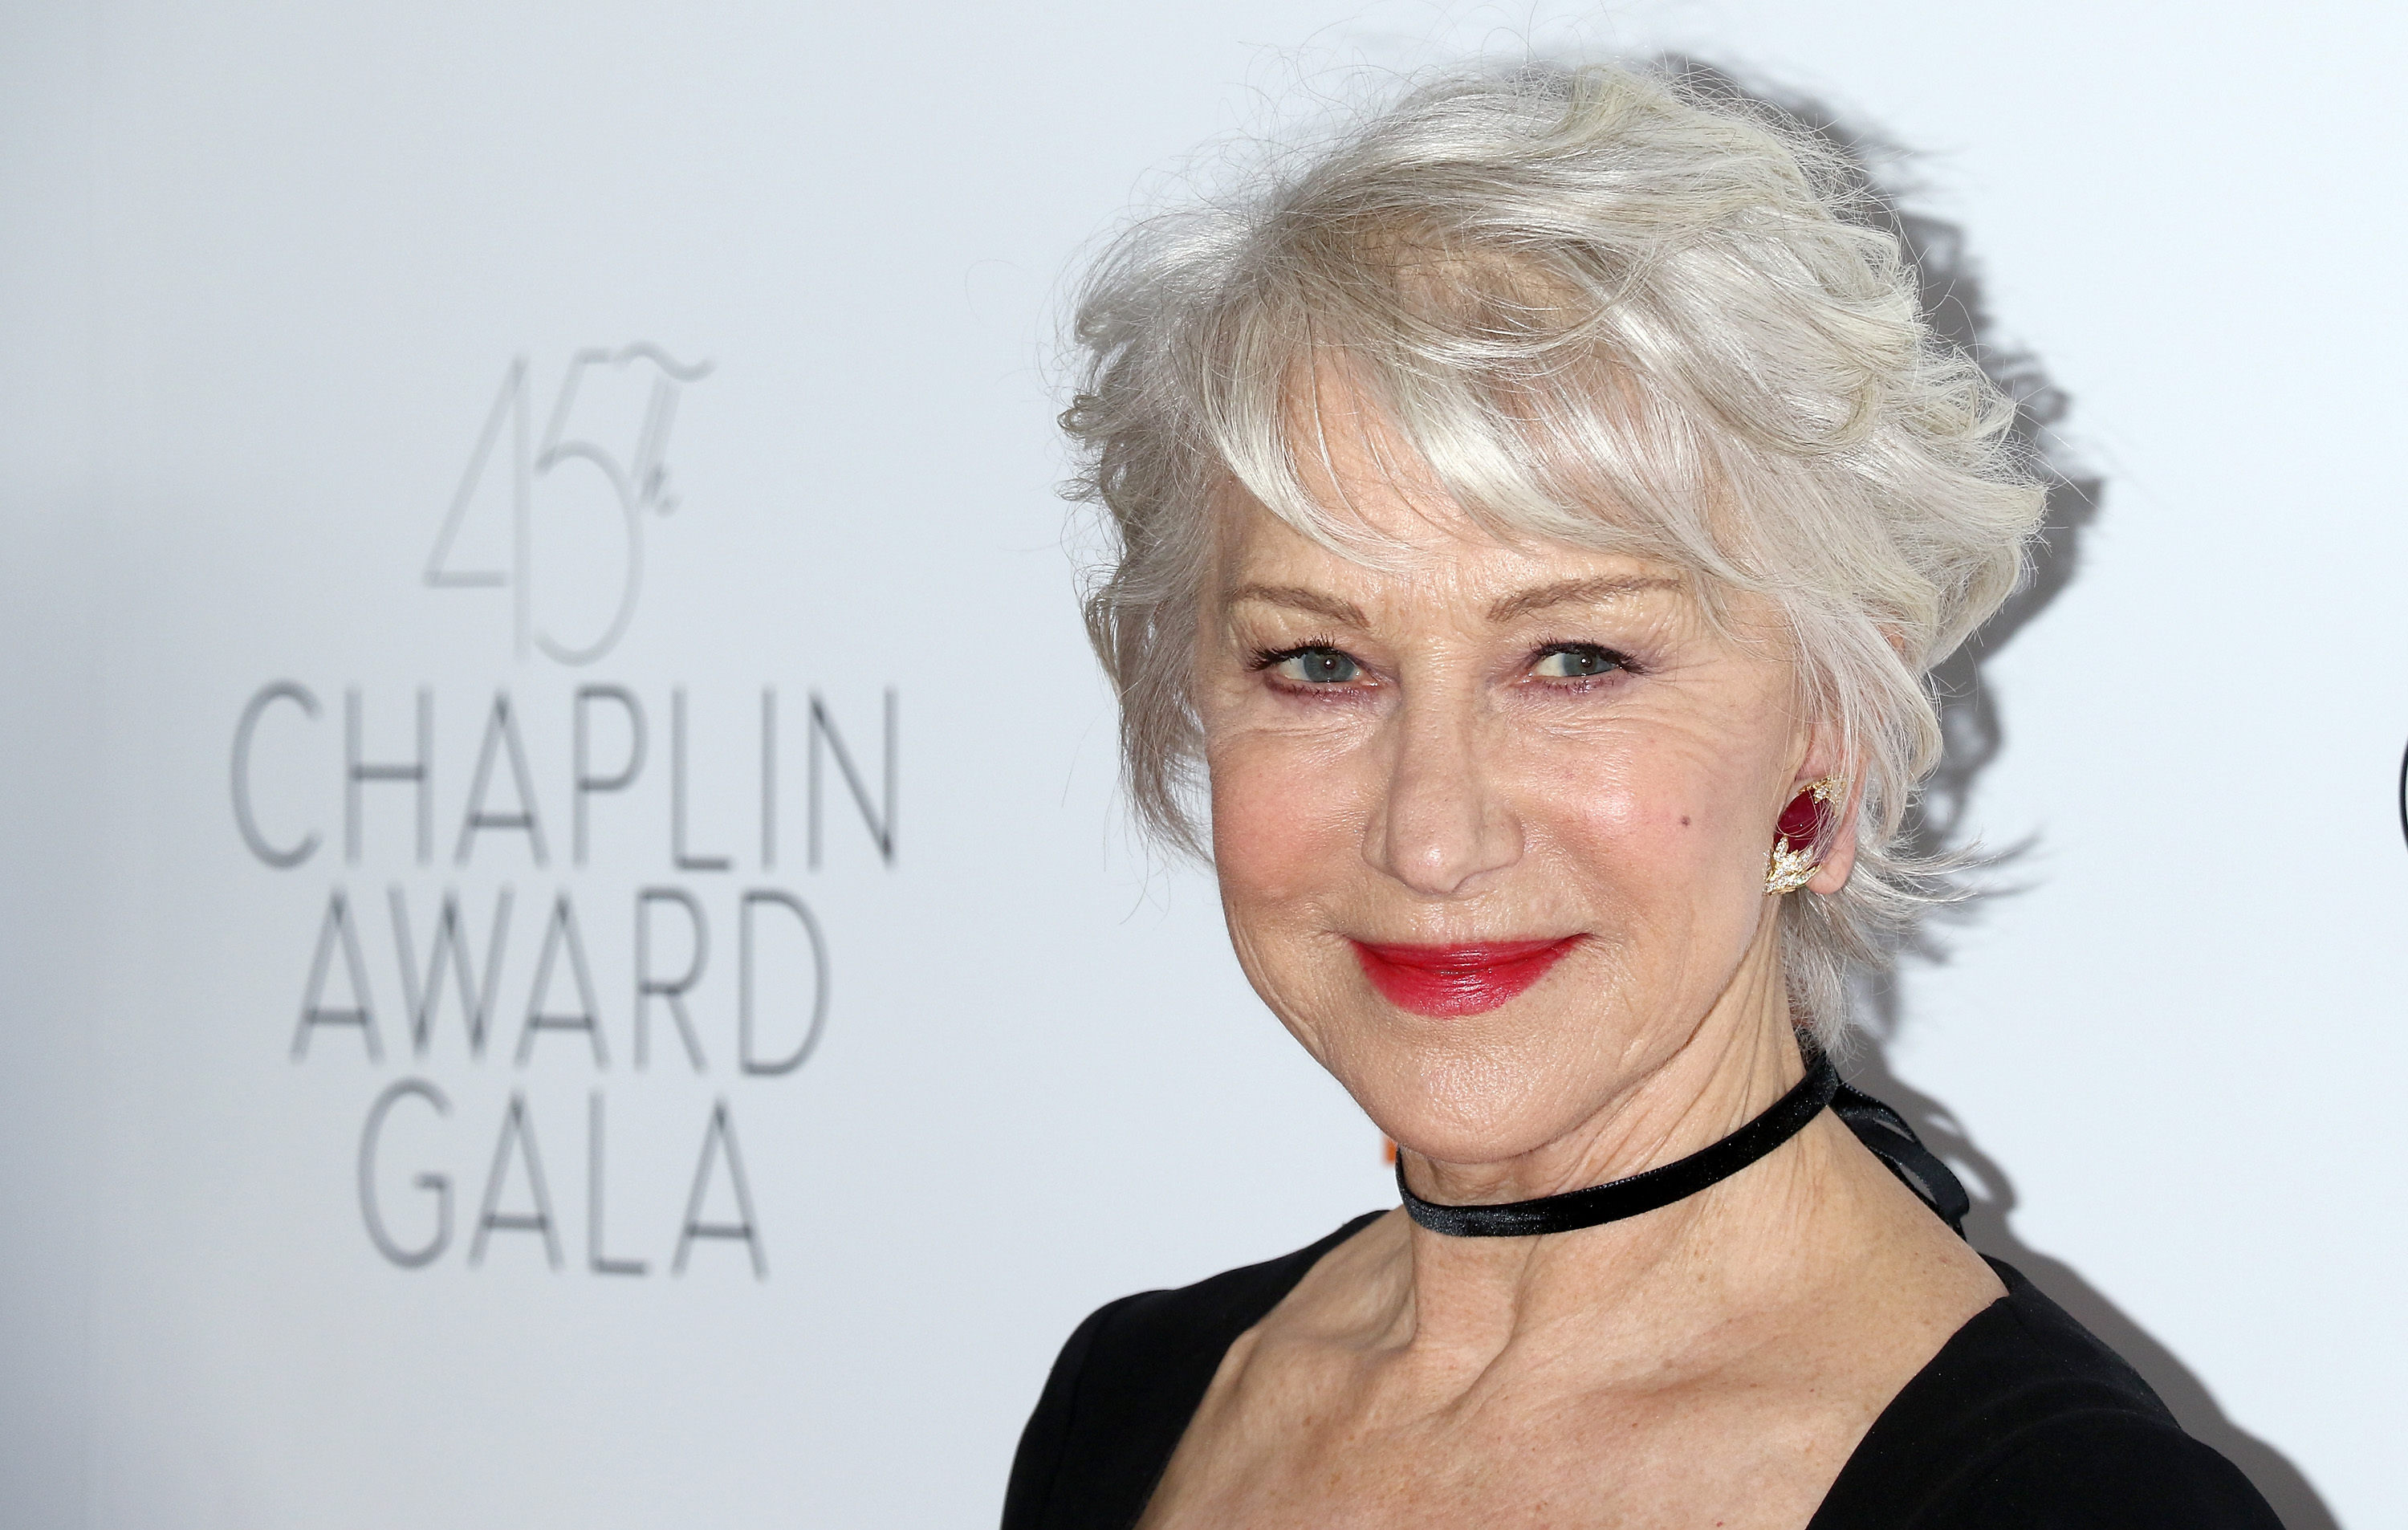 Helen Mirren at the 45th Chaplin Award Gala honoring Helen Mirren at Alice Tully Hall on April 30, 2018 in New York City | Source: Getty Images